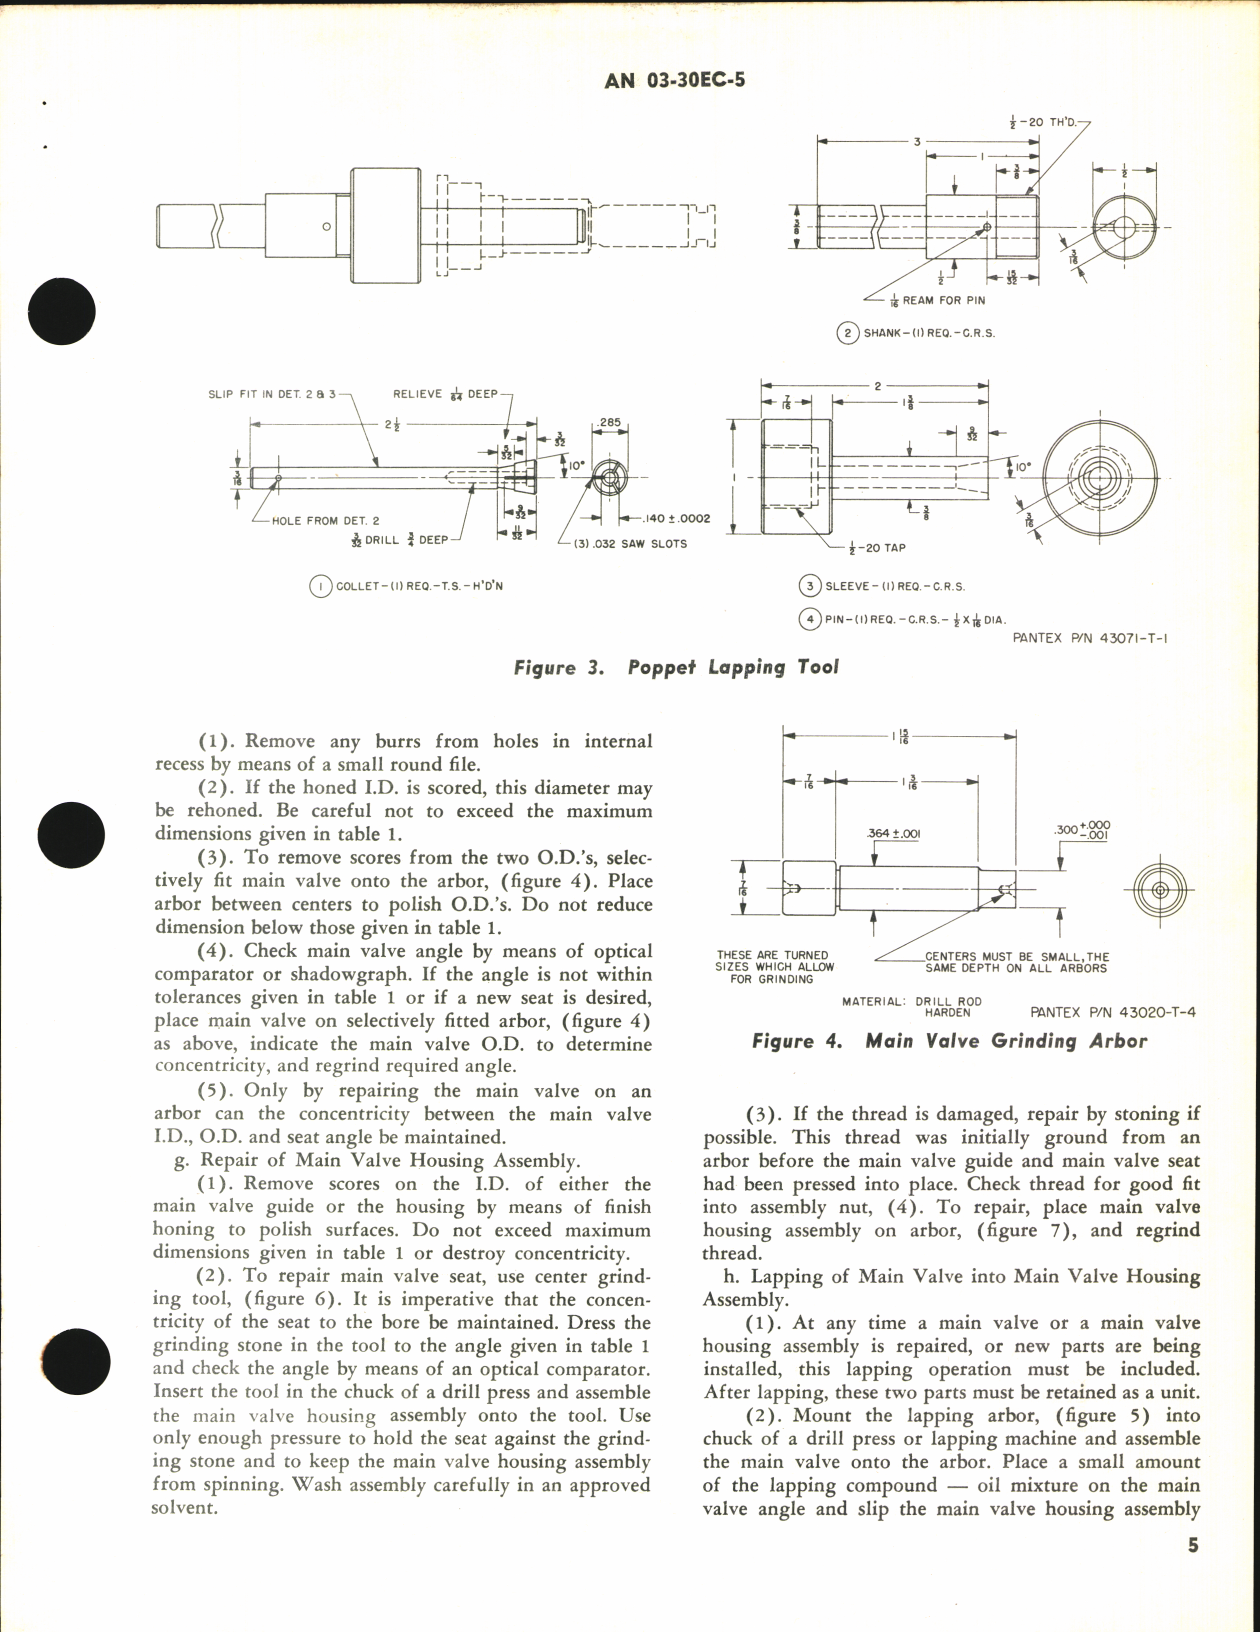 Sample page 5 from AirCorps Library document: Overhaul Instructions with Parts Breakdown for Hydraulic Relief Valve HPLV-A2